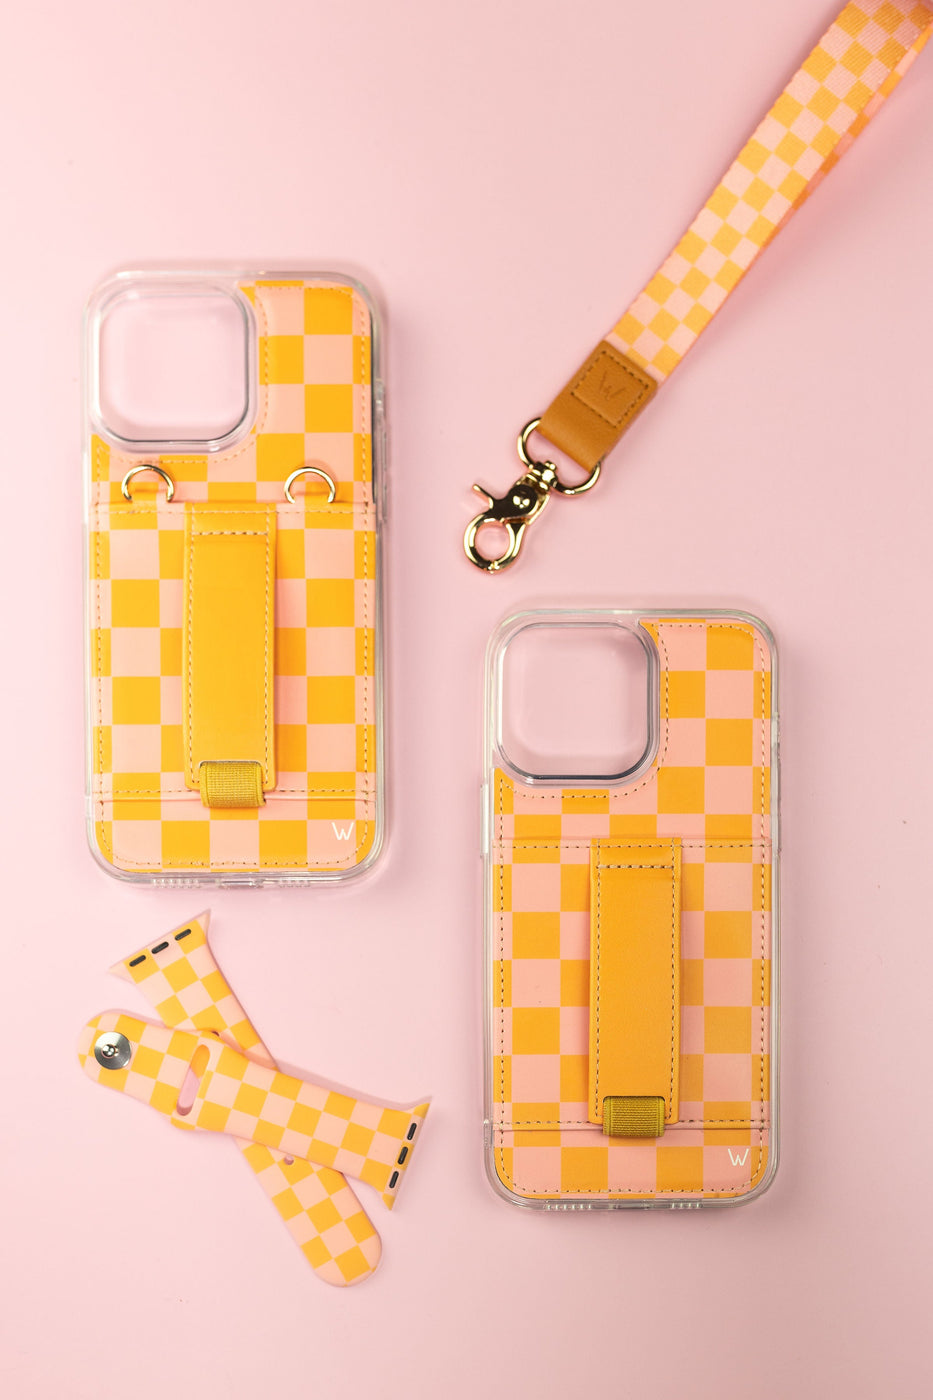 a cell phone case and wrist strap